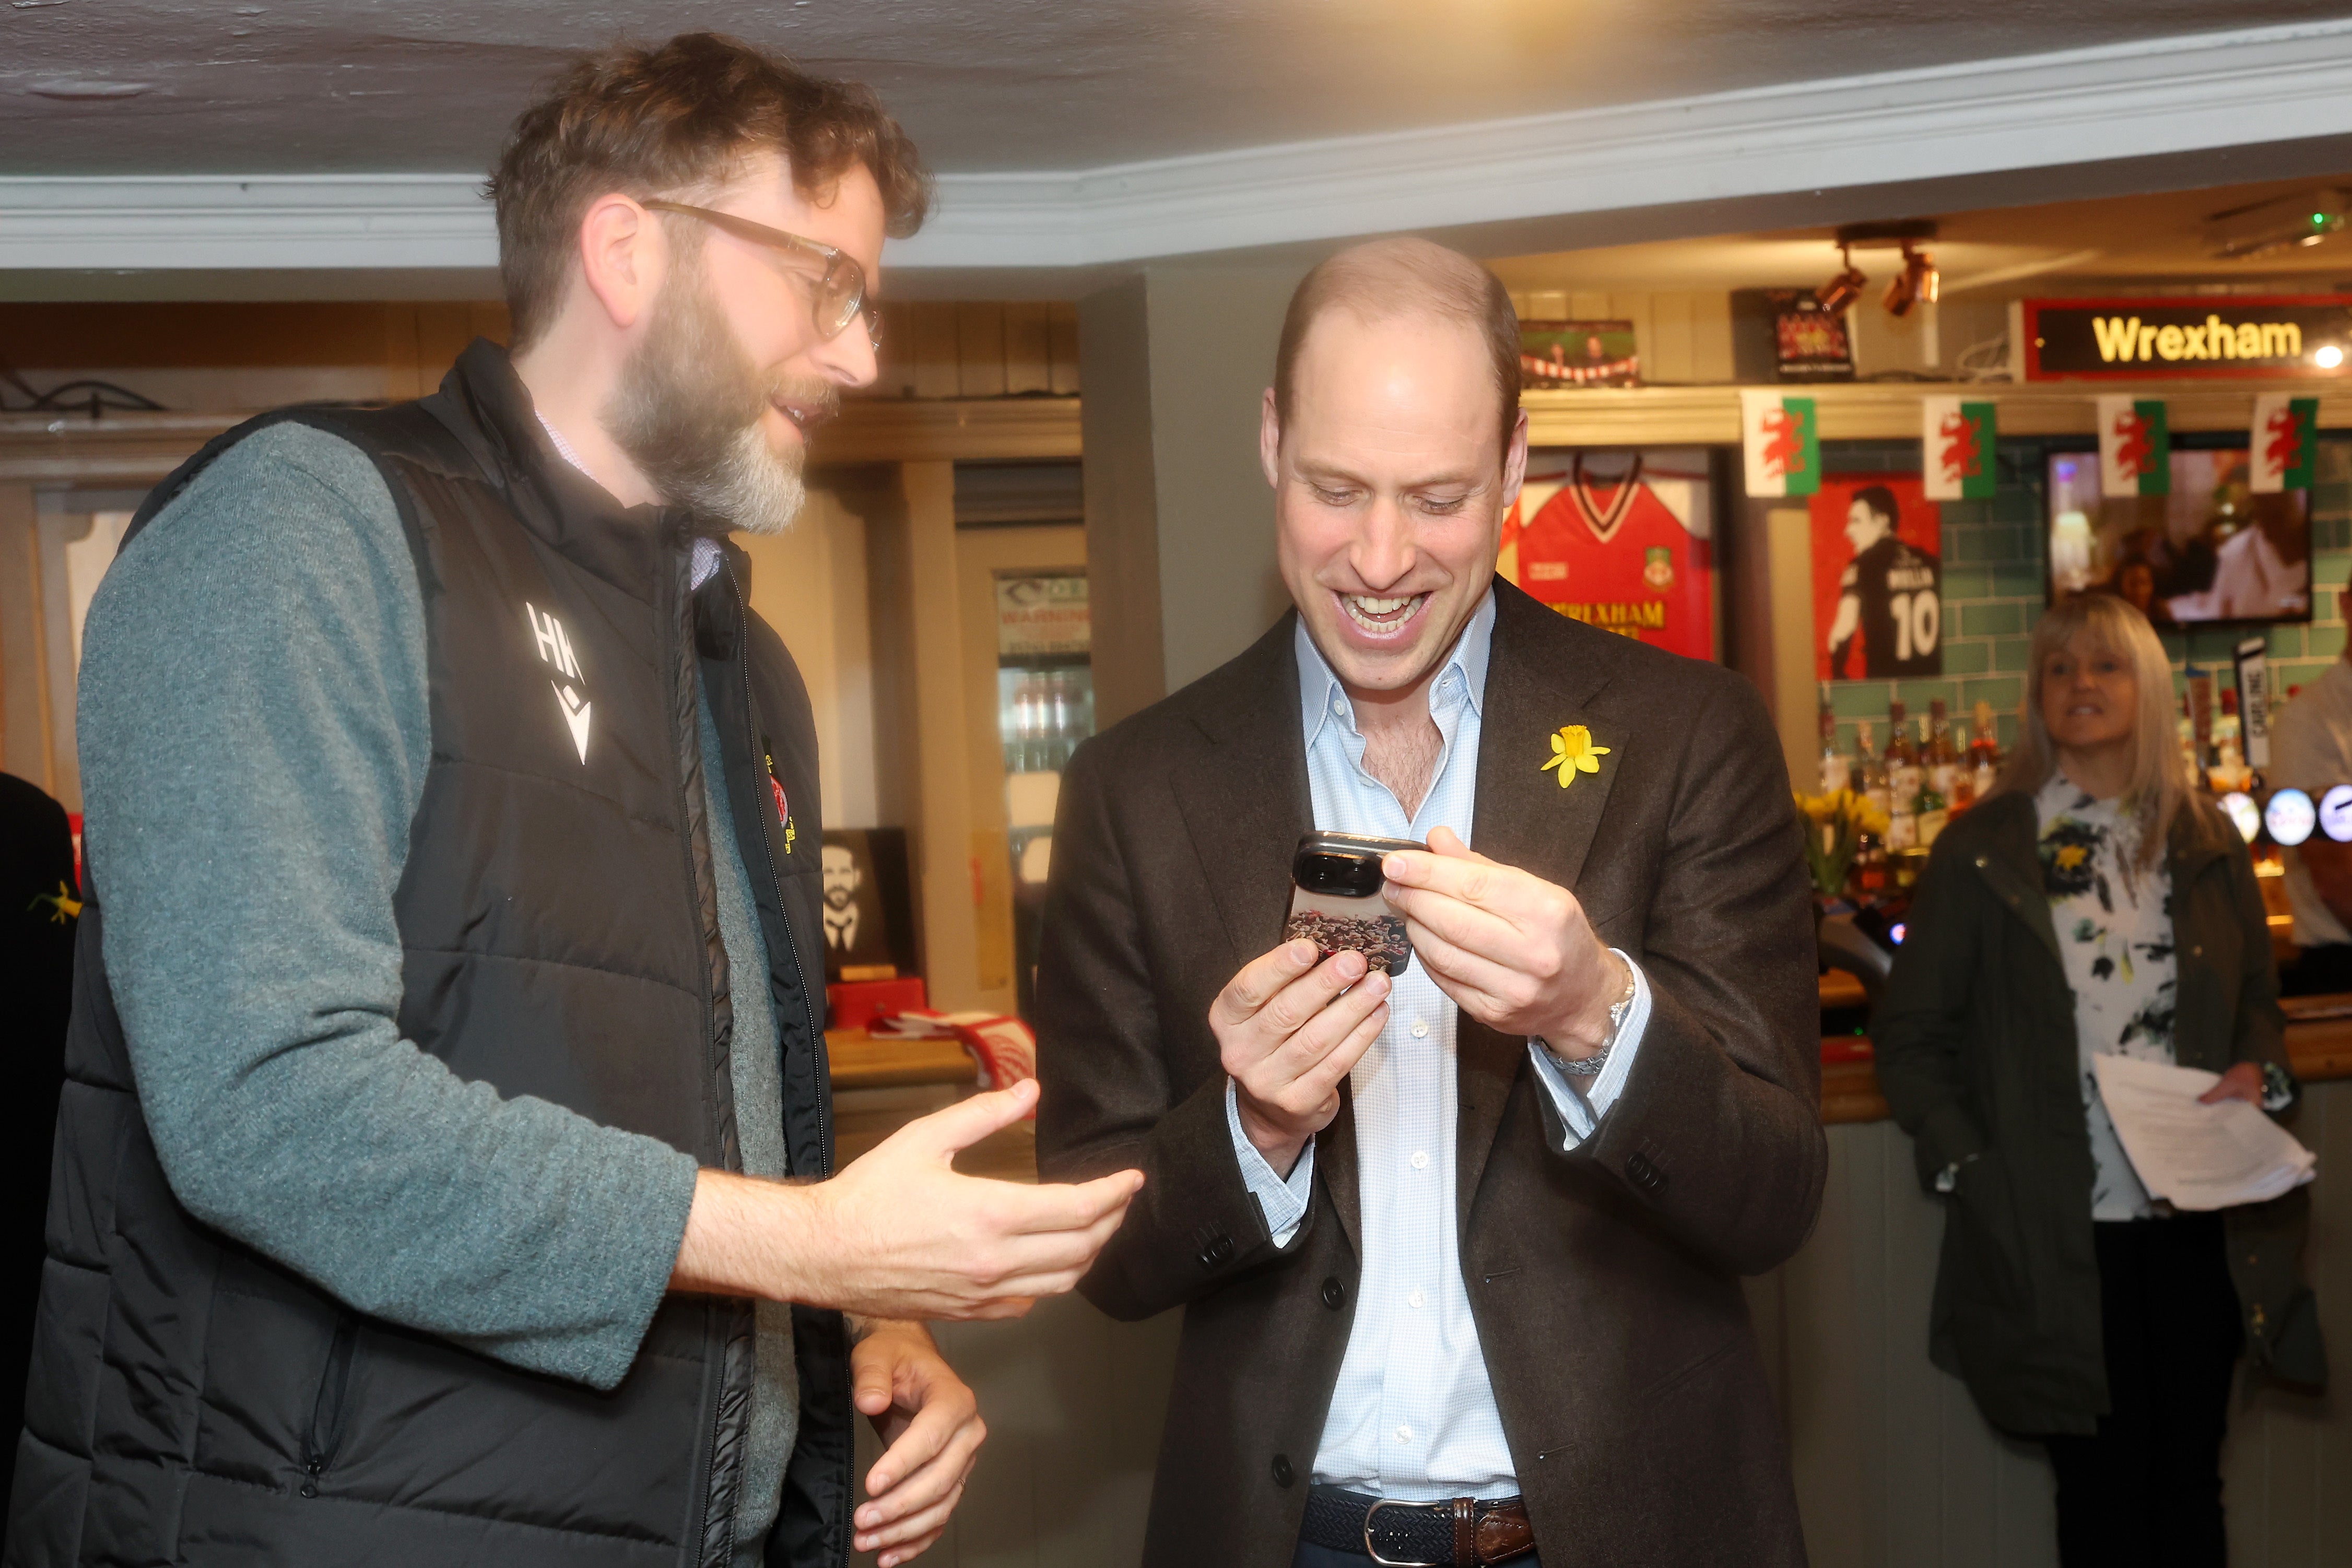 Prince William meets Humphrey Ker during a visit to The Turf public house at Wrexham